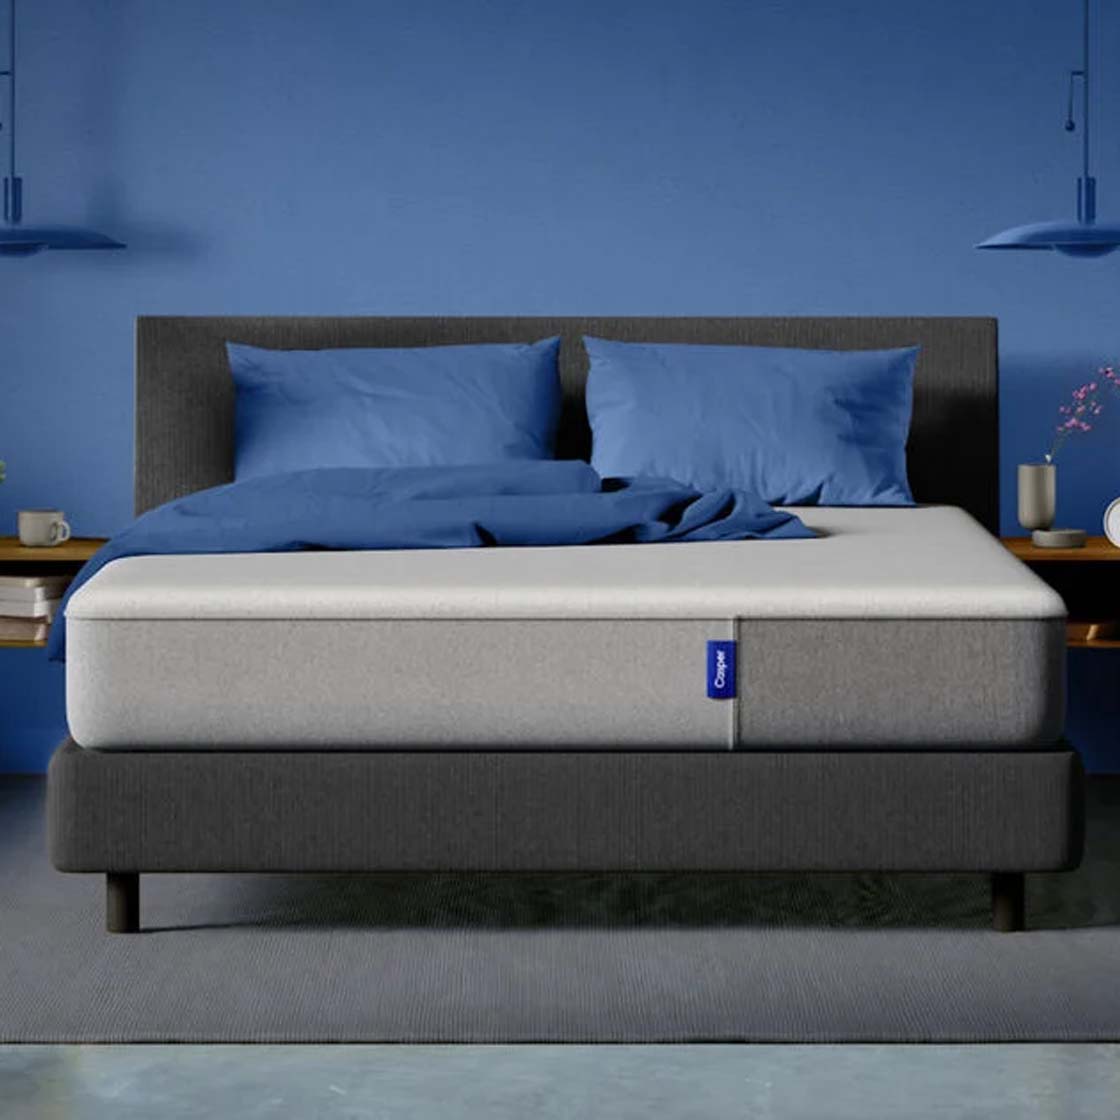 The Casper Mattress on a bed frame with two pillows